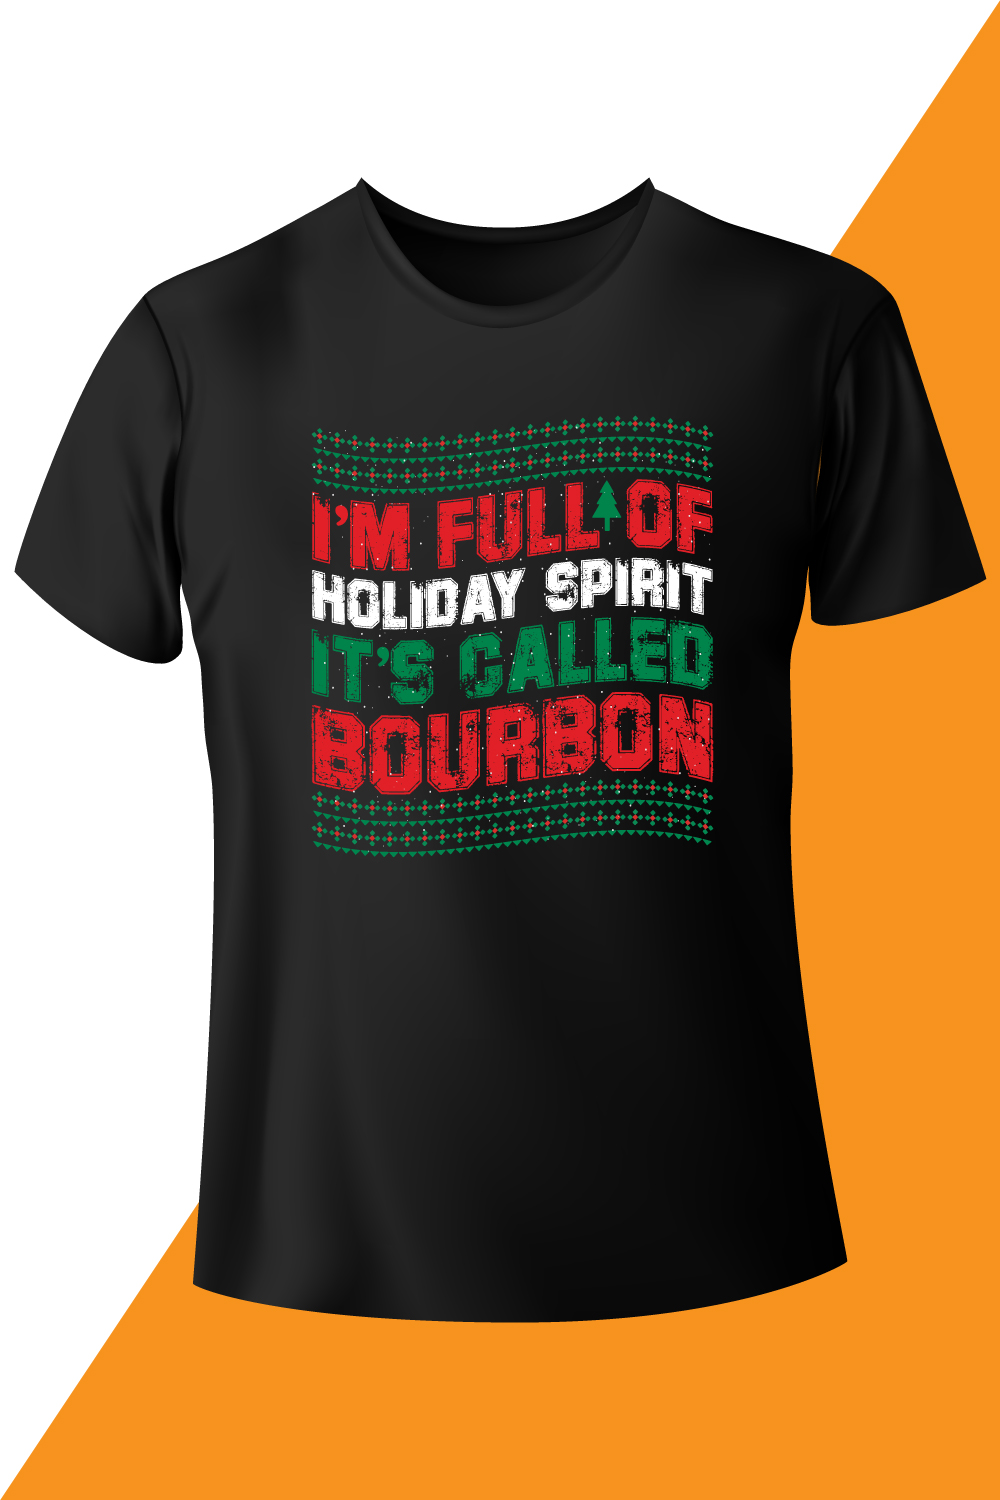 Image of a black t-shirt with a beautiful inscription i'm full of holiday spirit its called bourbon.